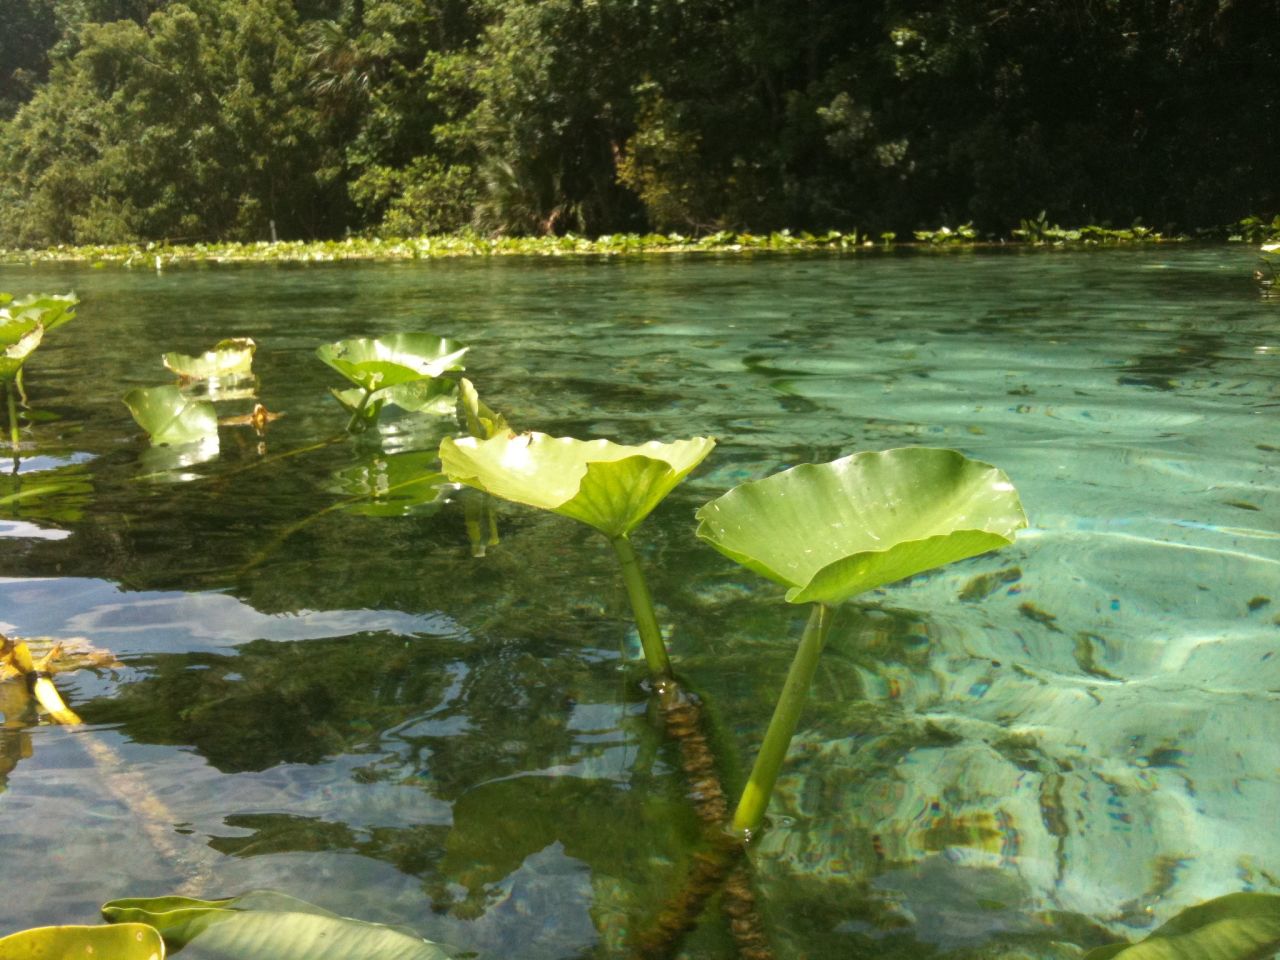 On a hot July day, the brisk waters of Alexander Springs in Ocala National Forest prove irresistible. It would be difficult to find a more inviting swim. Lily pads flourish in the spring's crystal-clear waters.